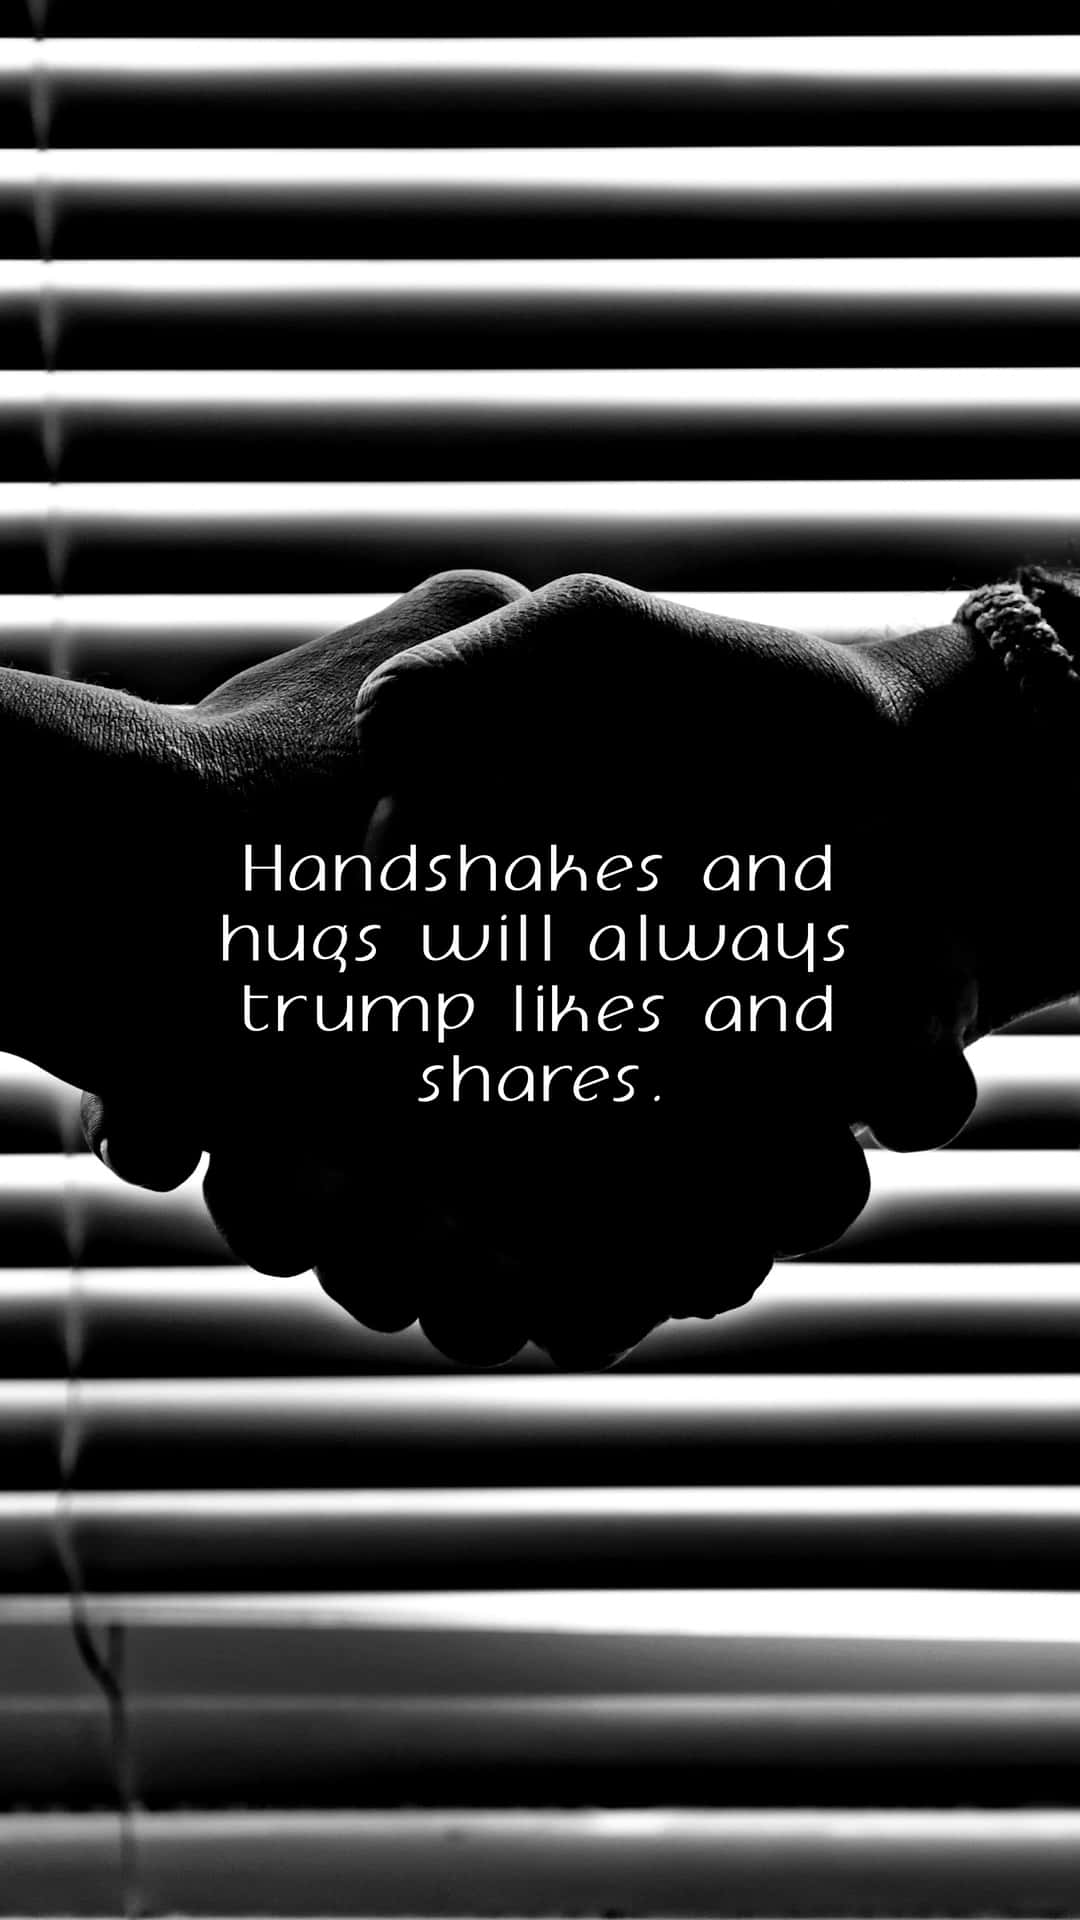 Handshake In Black And White With A Quote Background